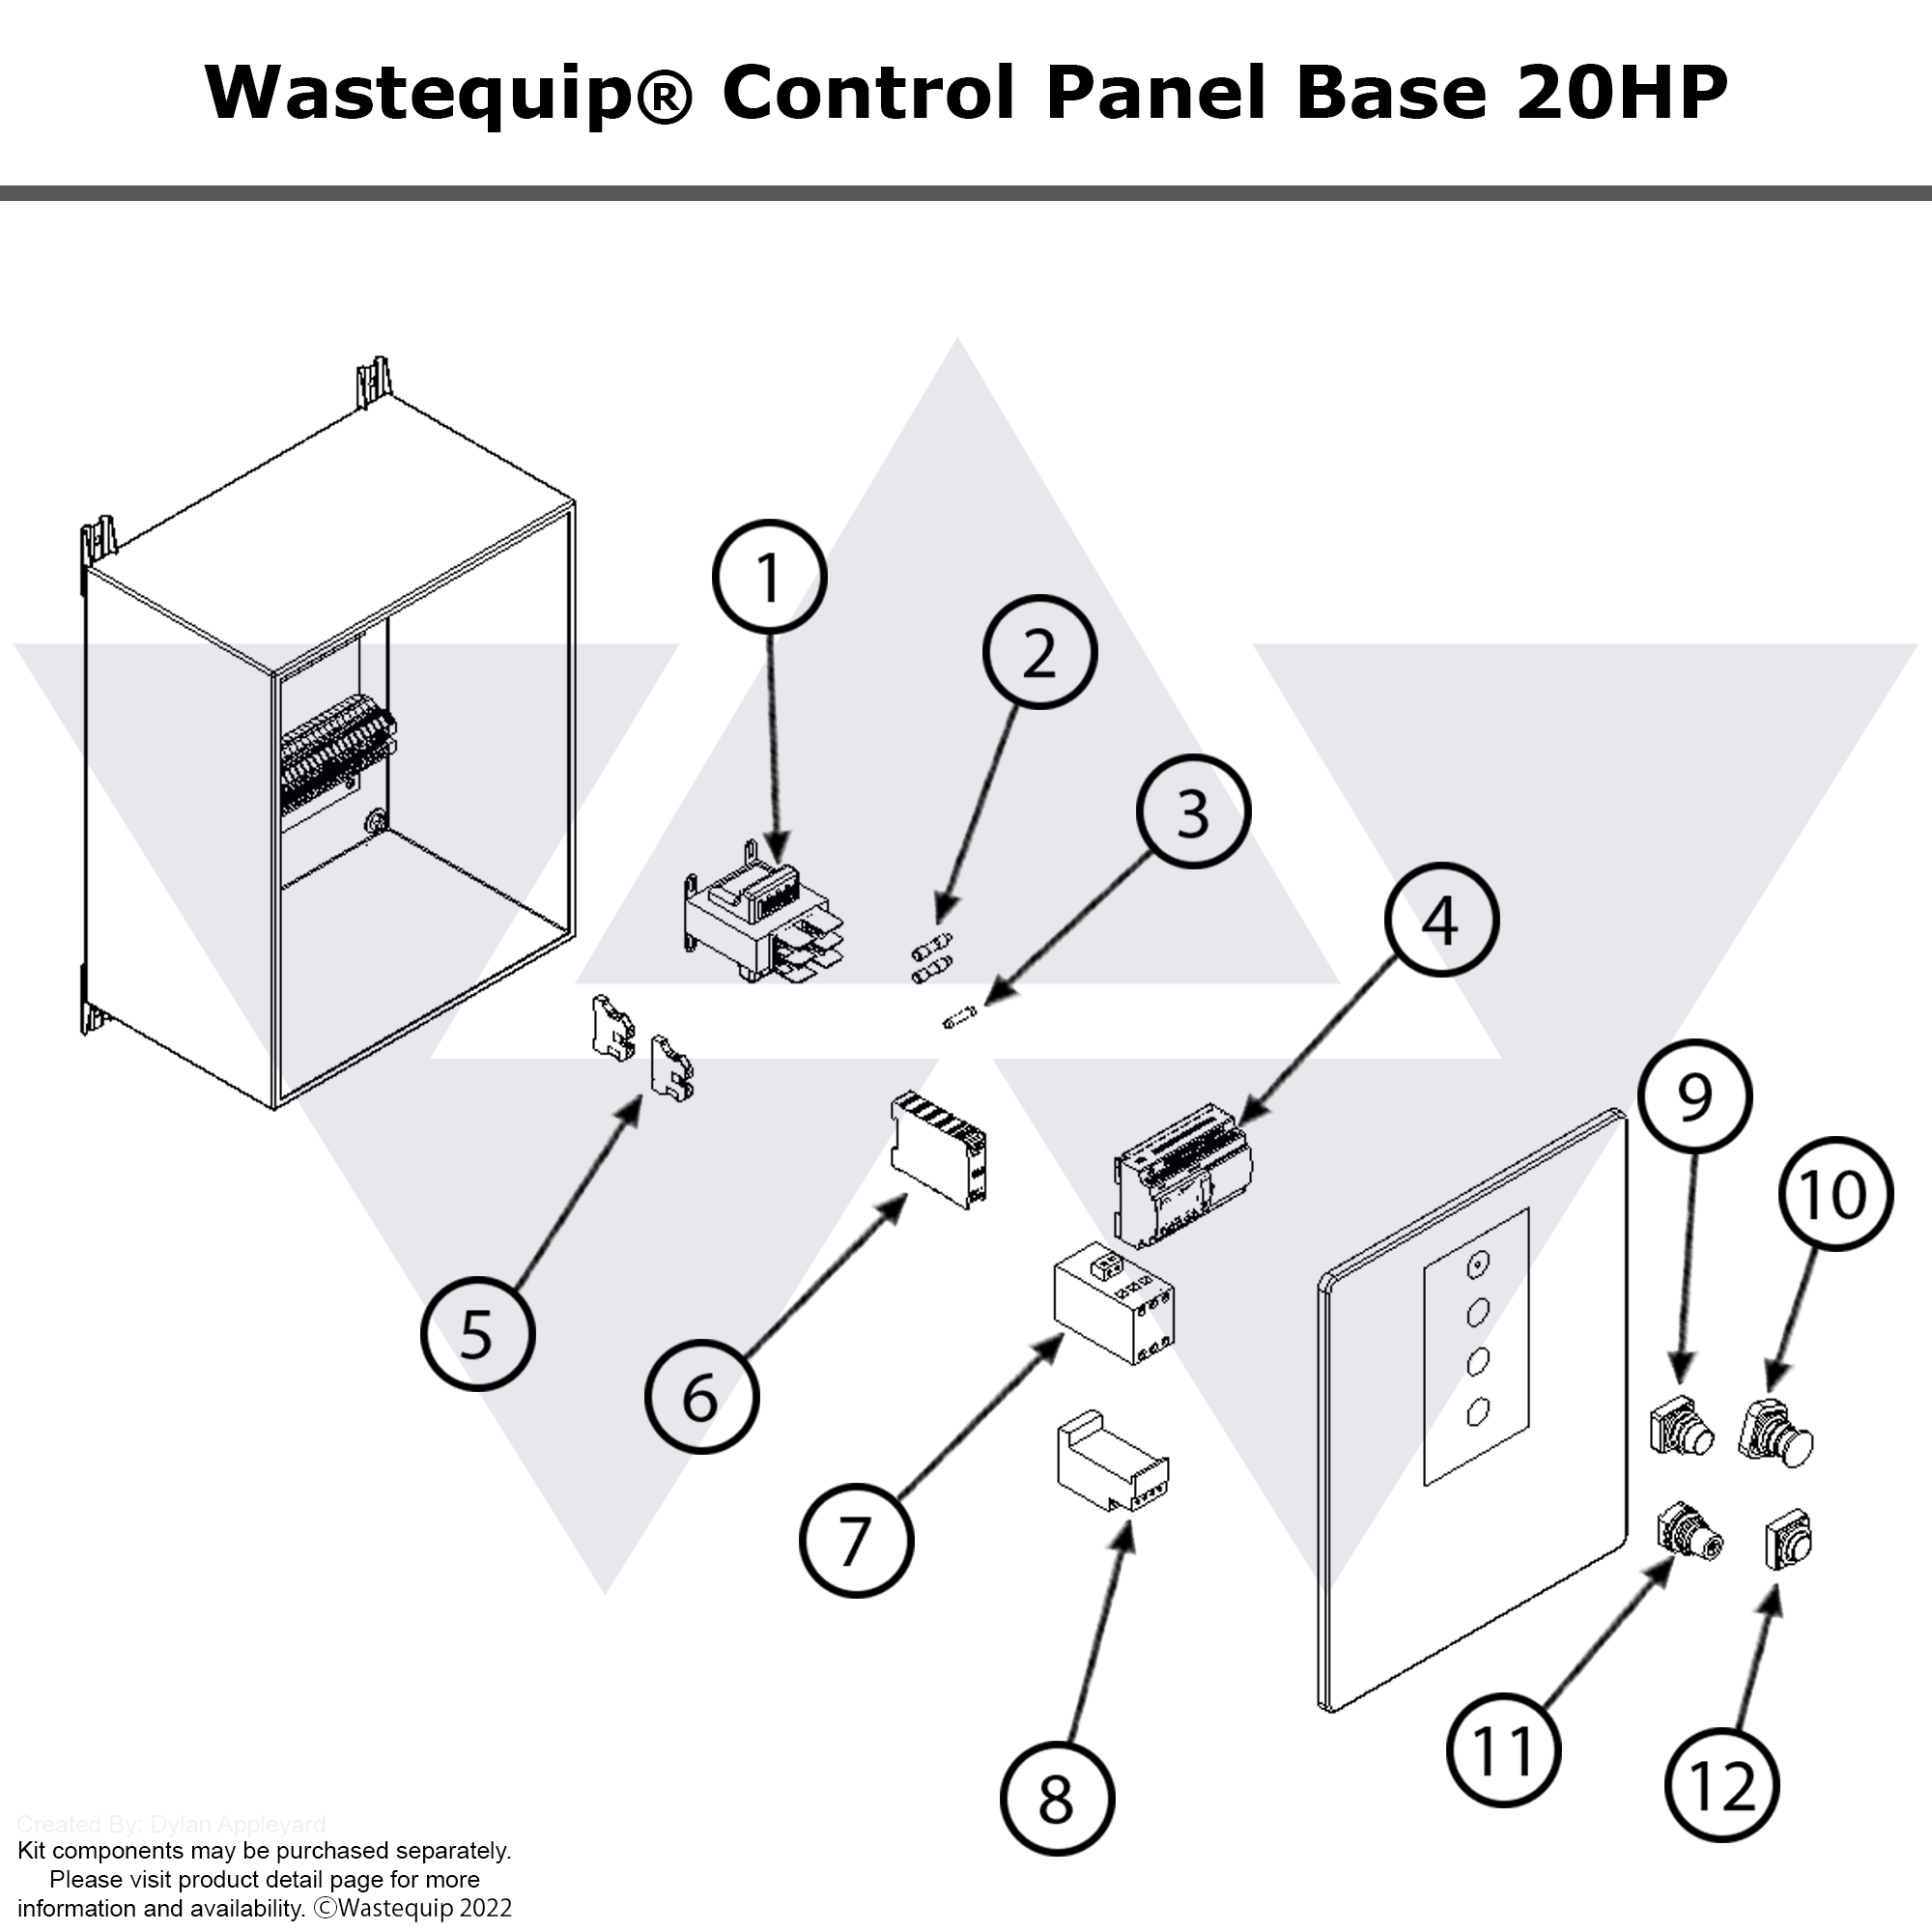 Wastequip® Control Panel Base 20HP